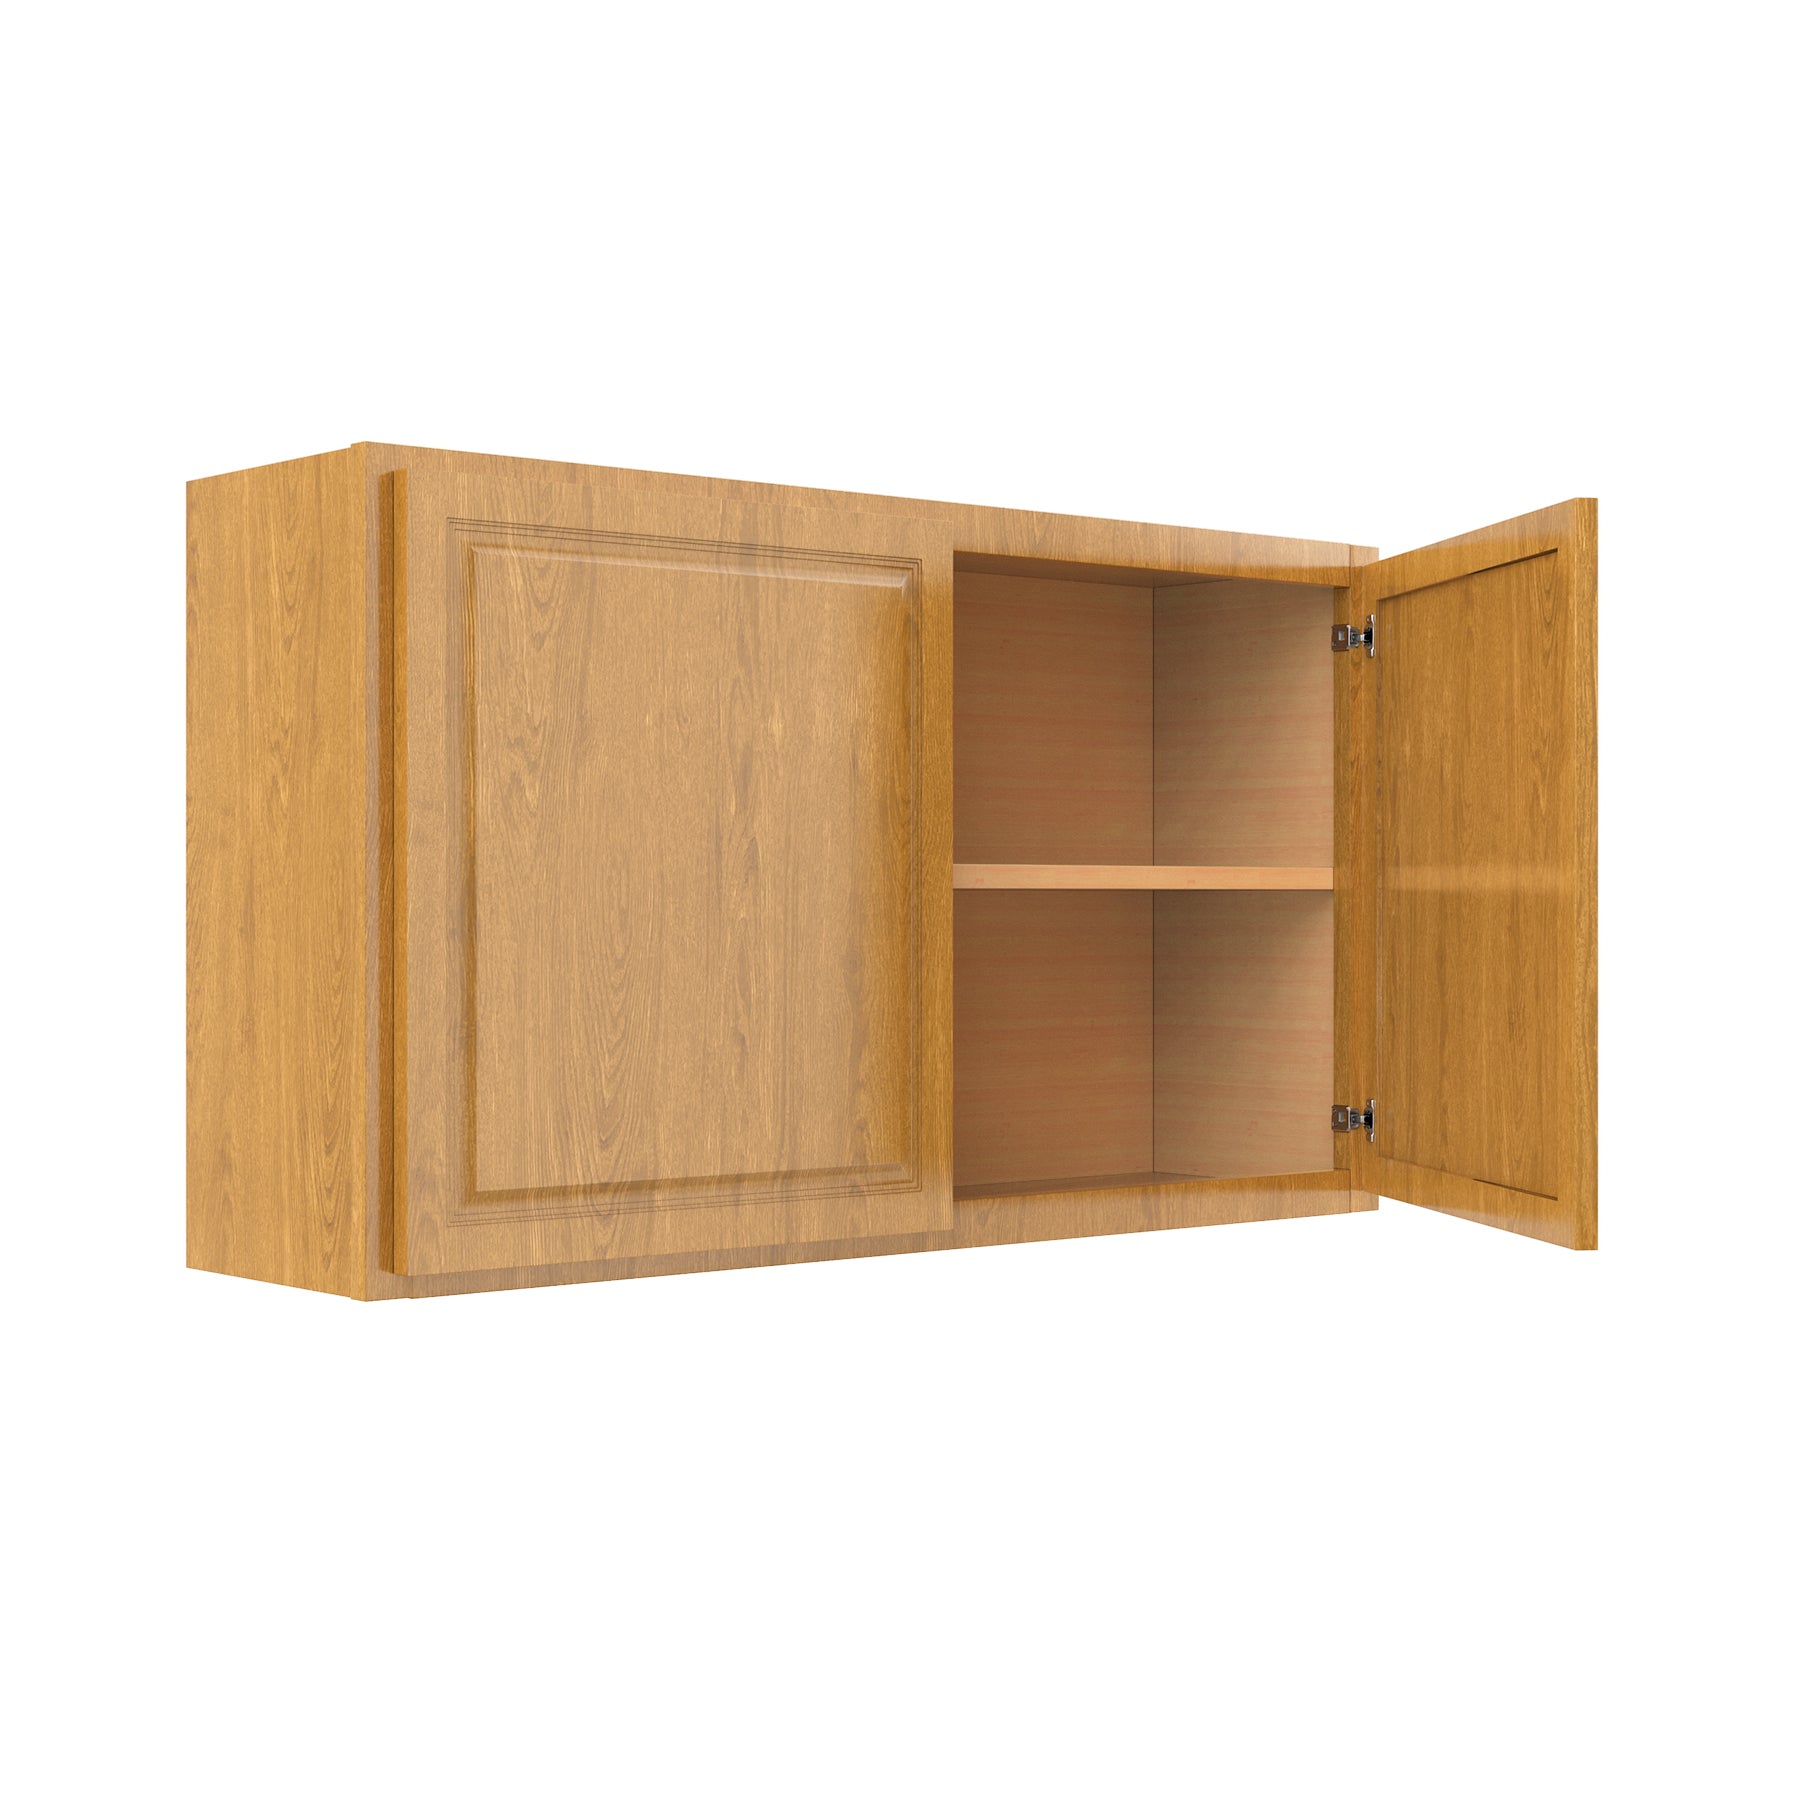 Country Oak 42"W x 24"H Wall Cabinet